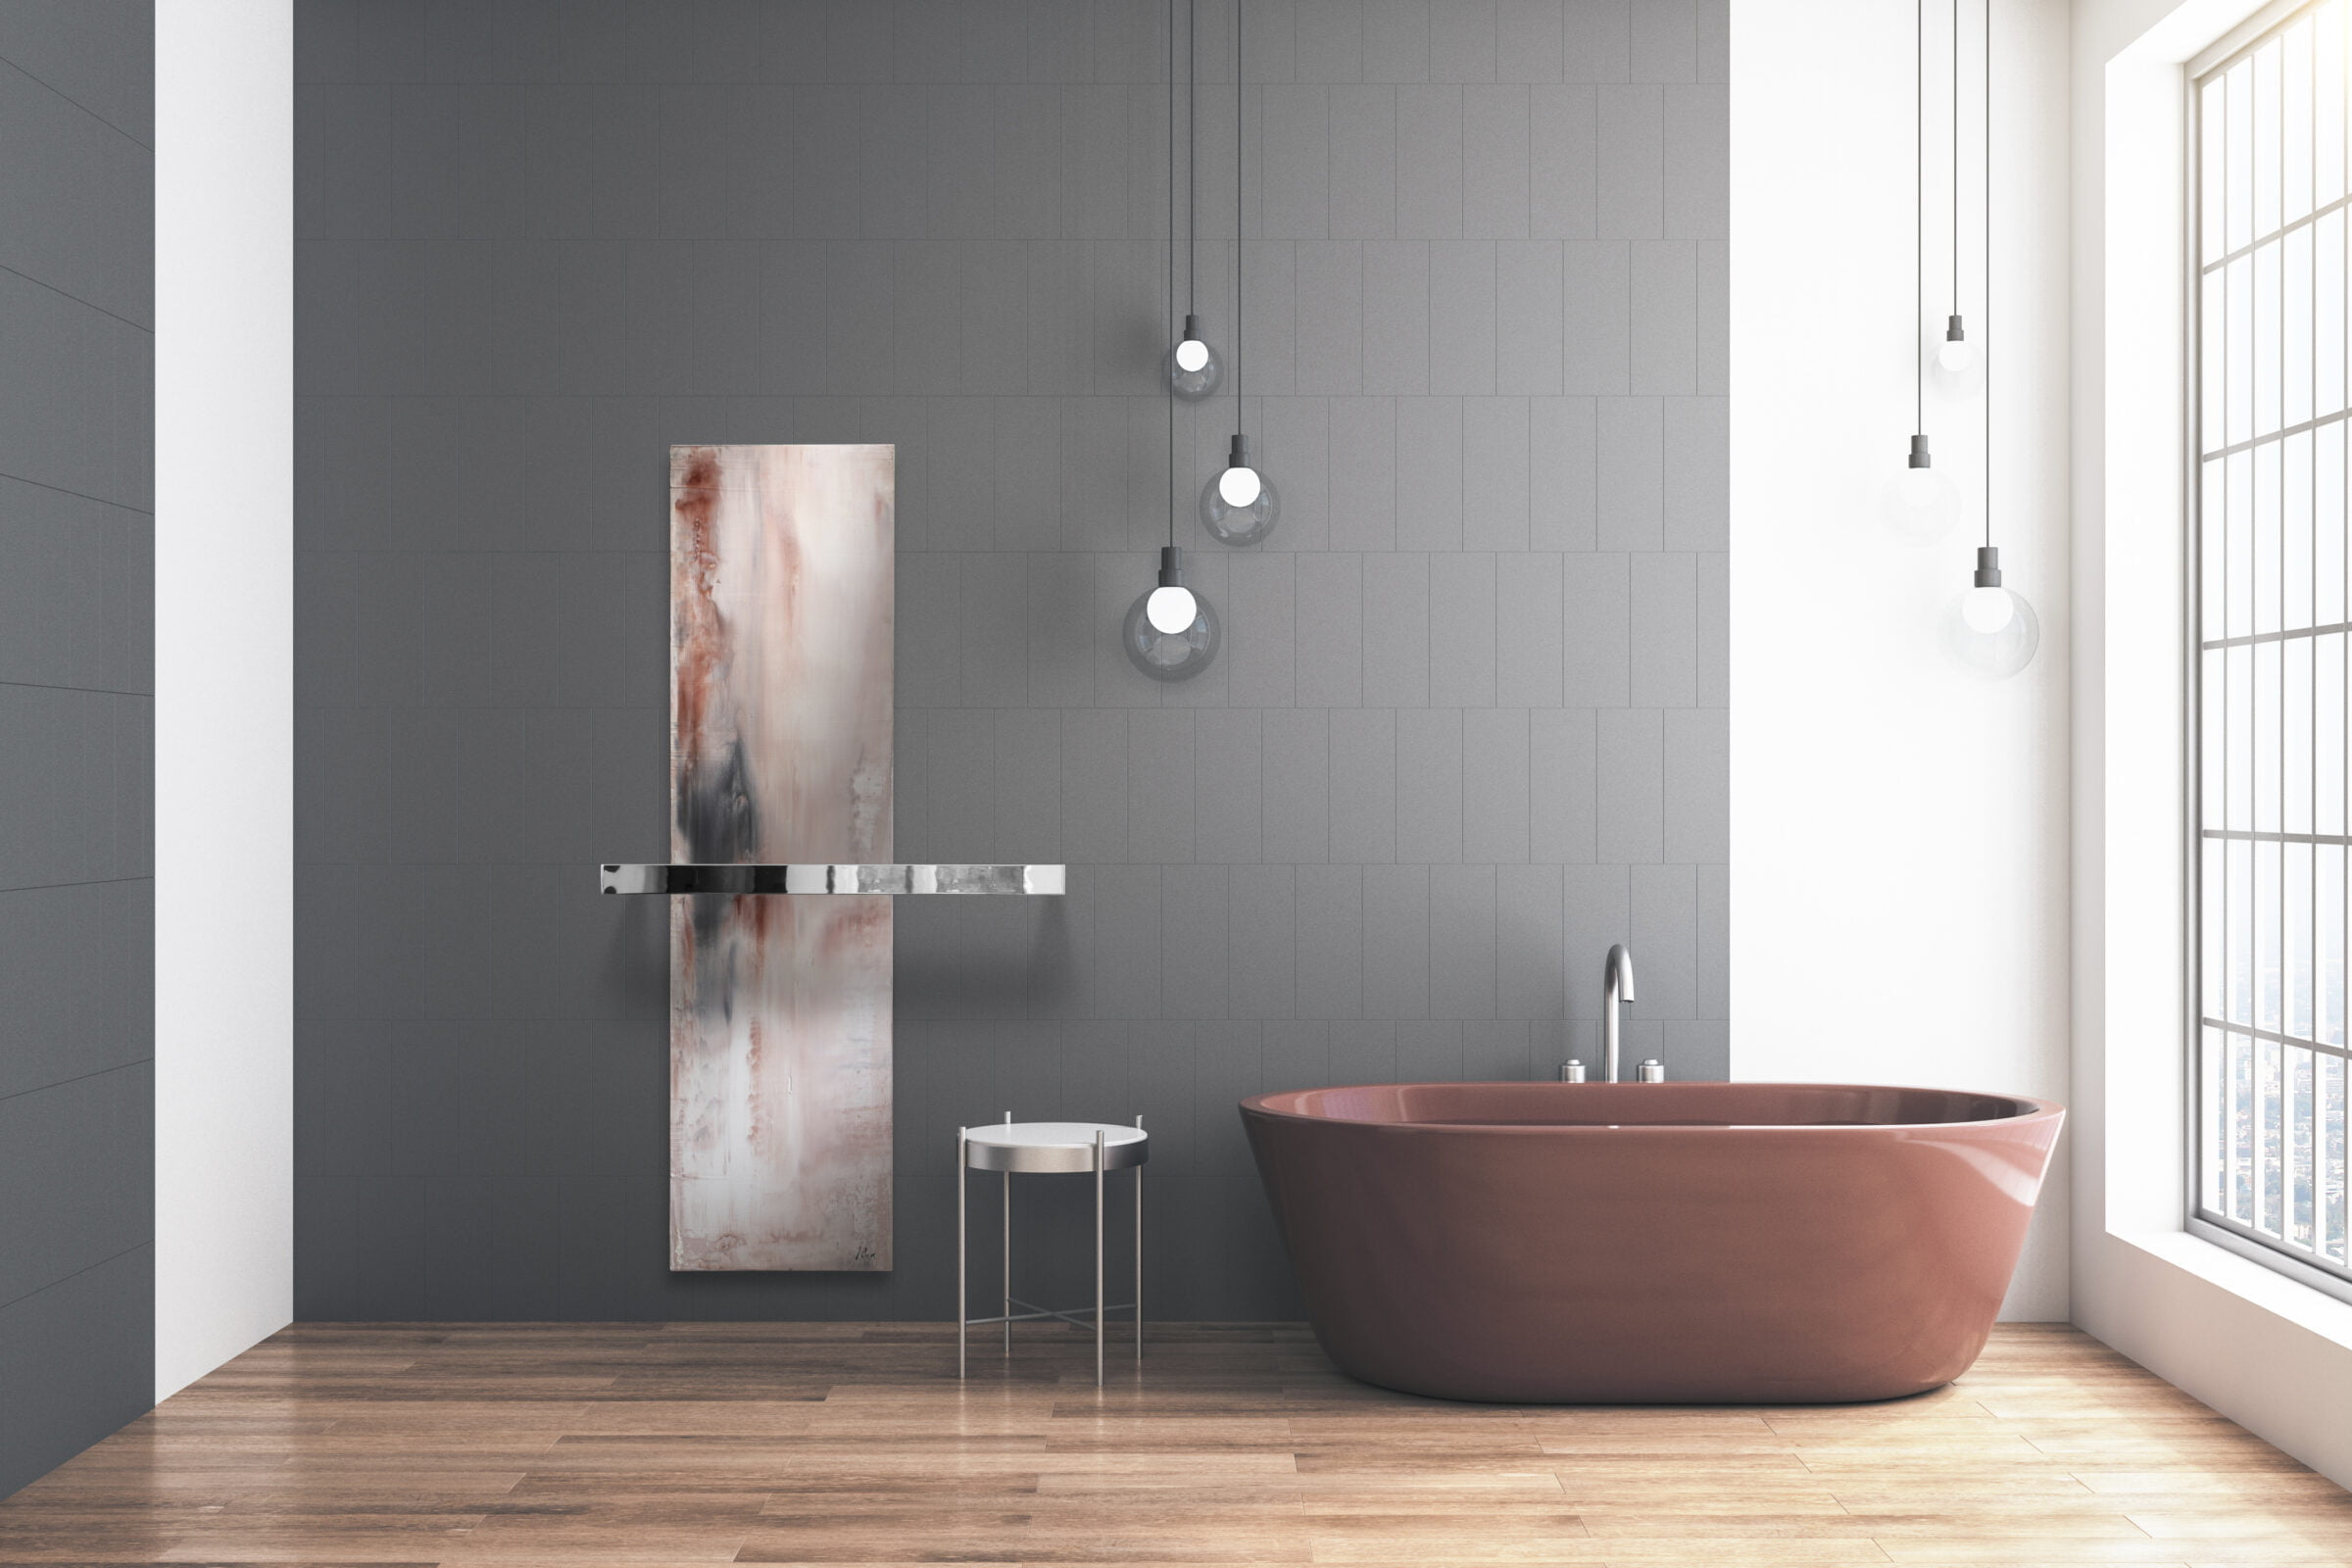 Luxury loft bathroom with self care products. Style and hygiene concept. Mock up. 3d rendering